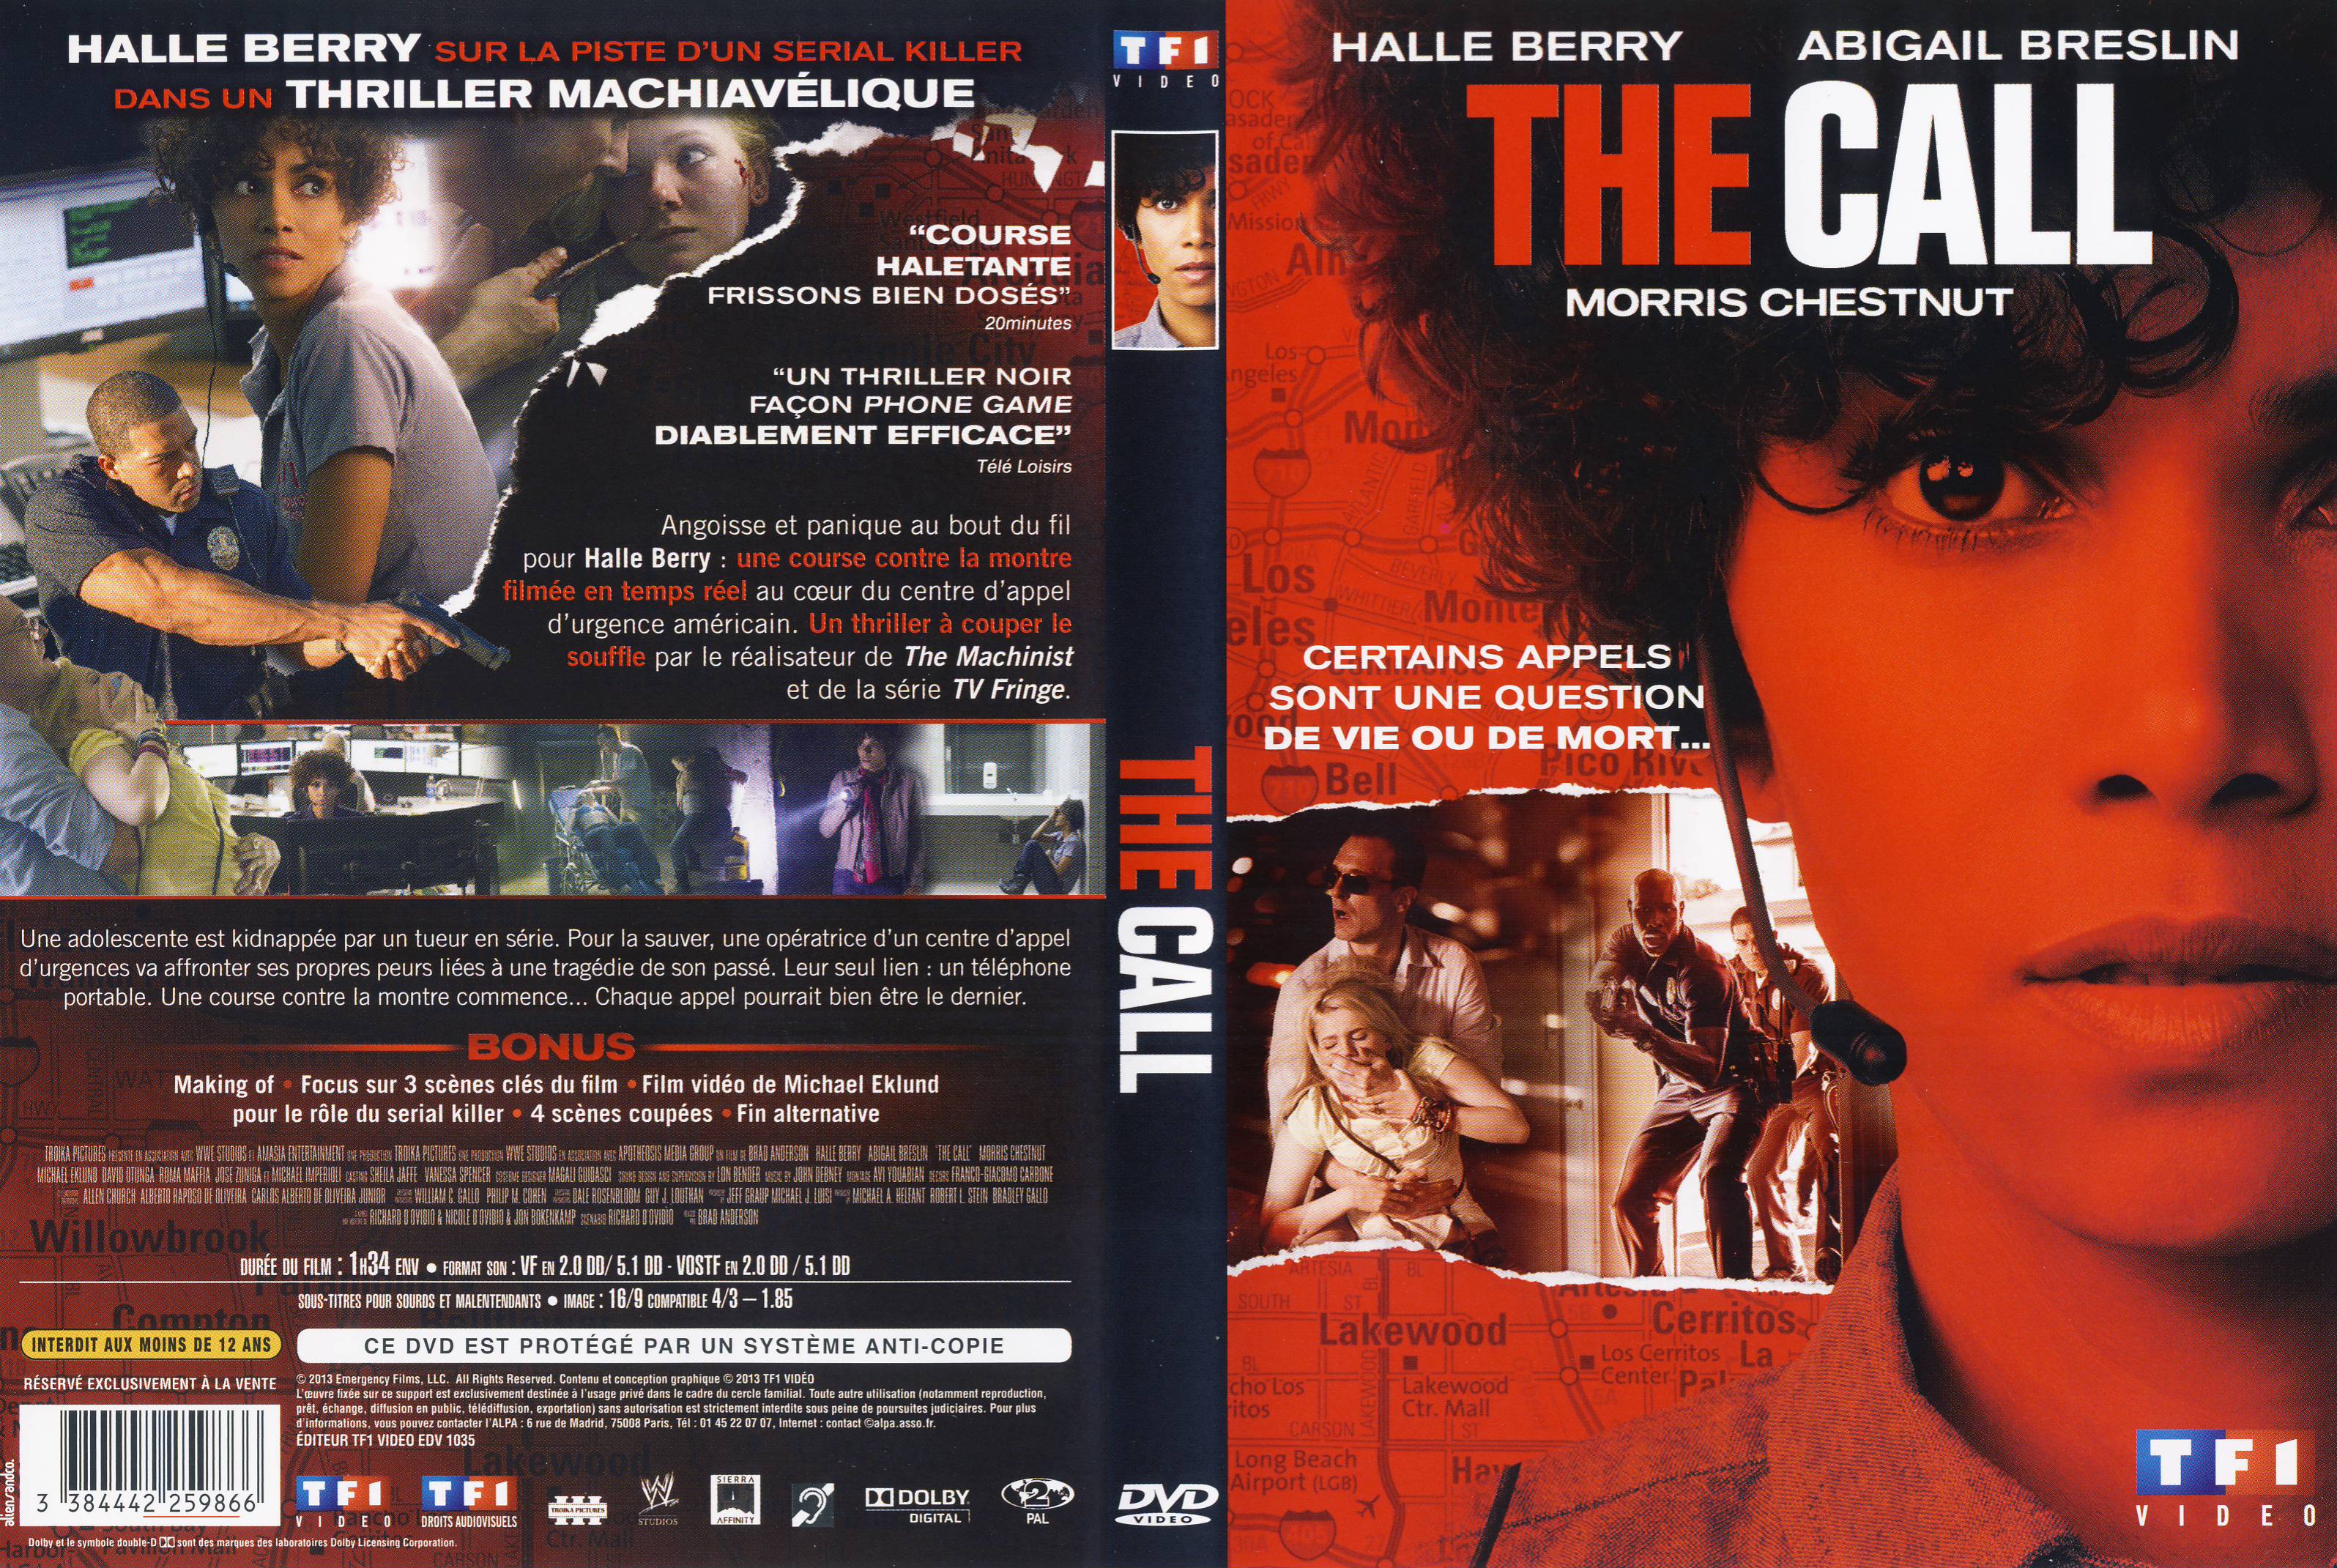 Jaquette DVD The Call